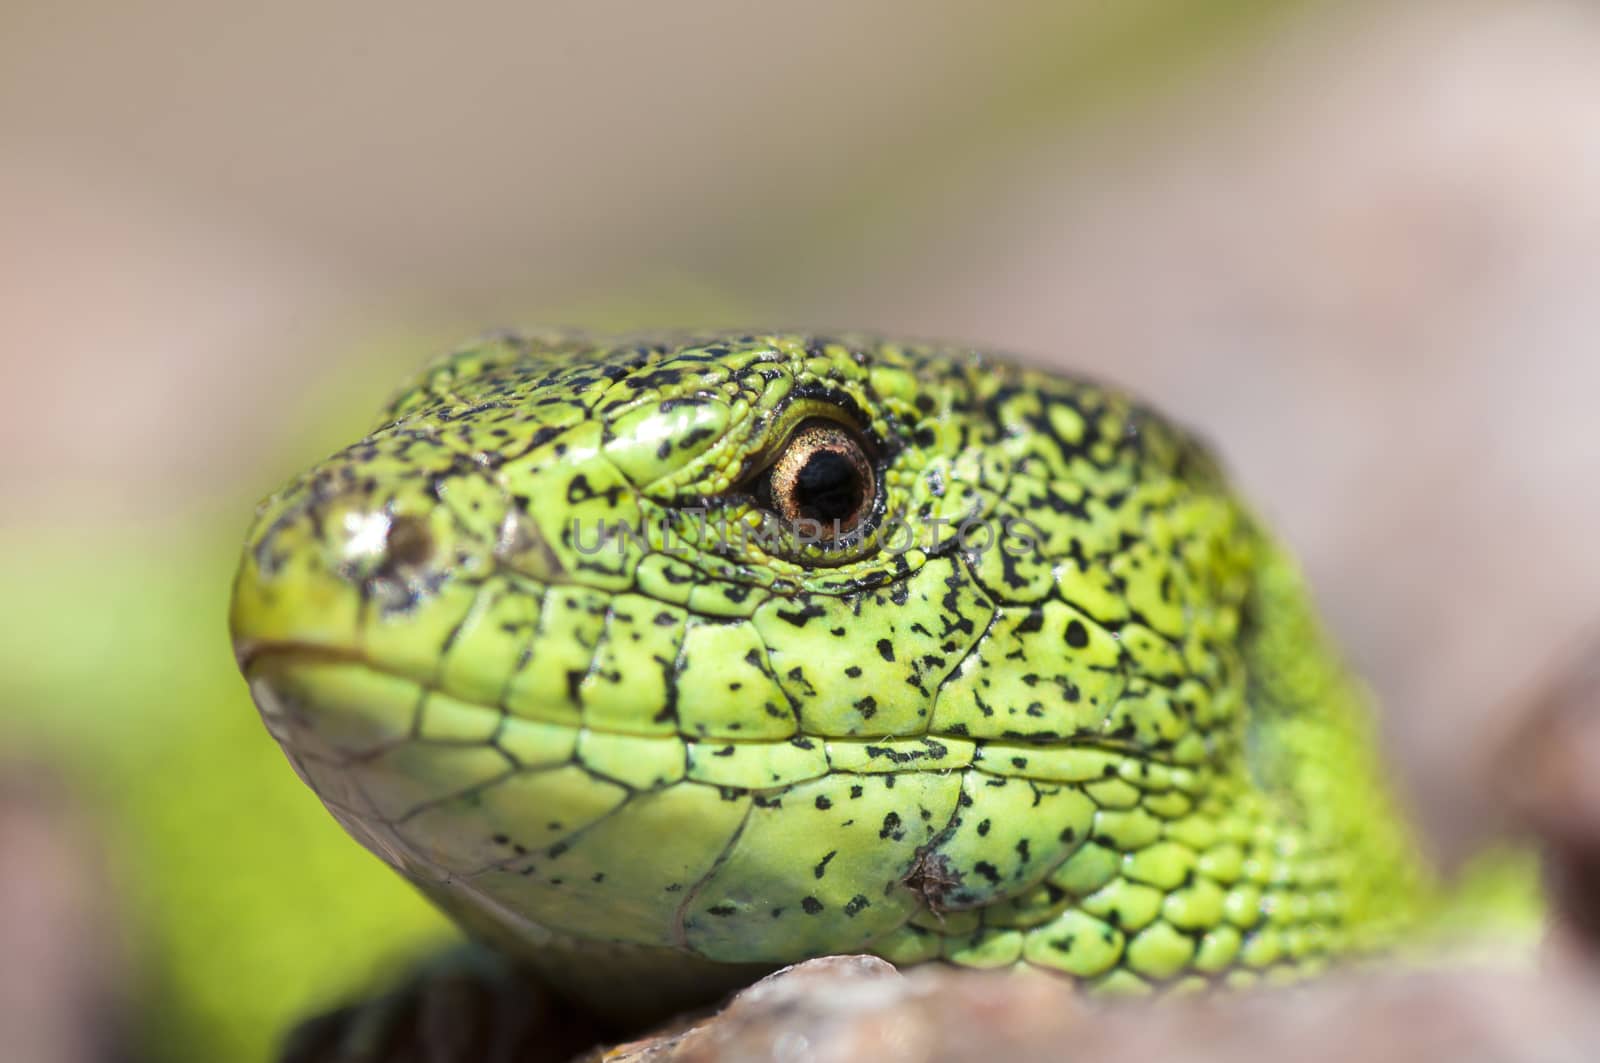 Sand lizard (Lacerta agilis) male close up by dred